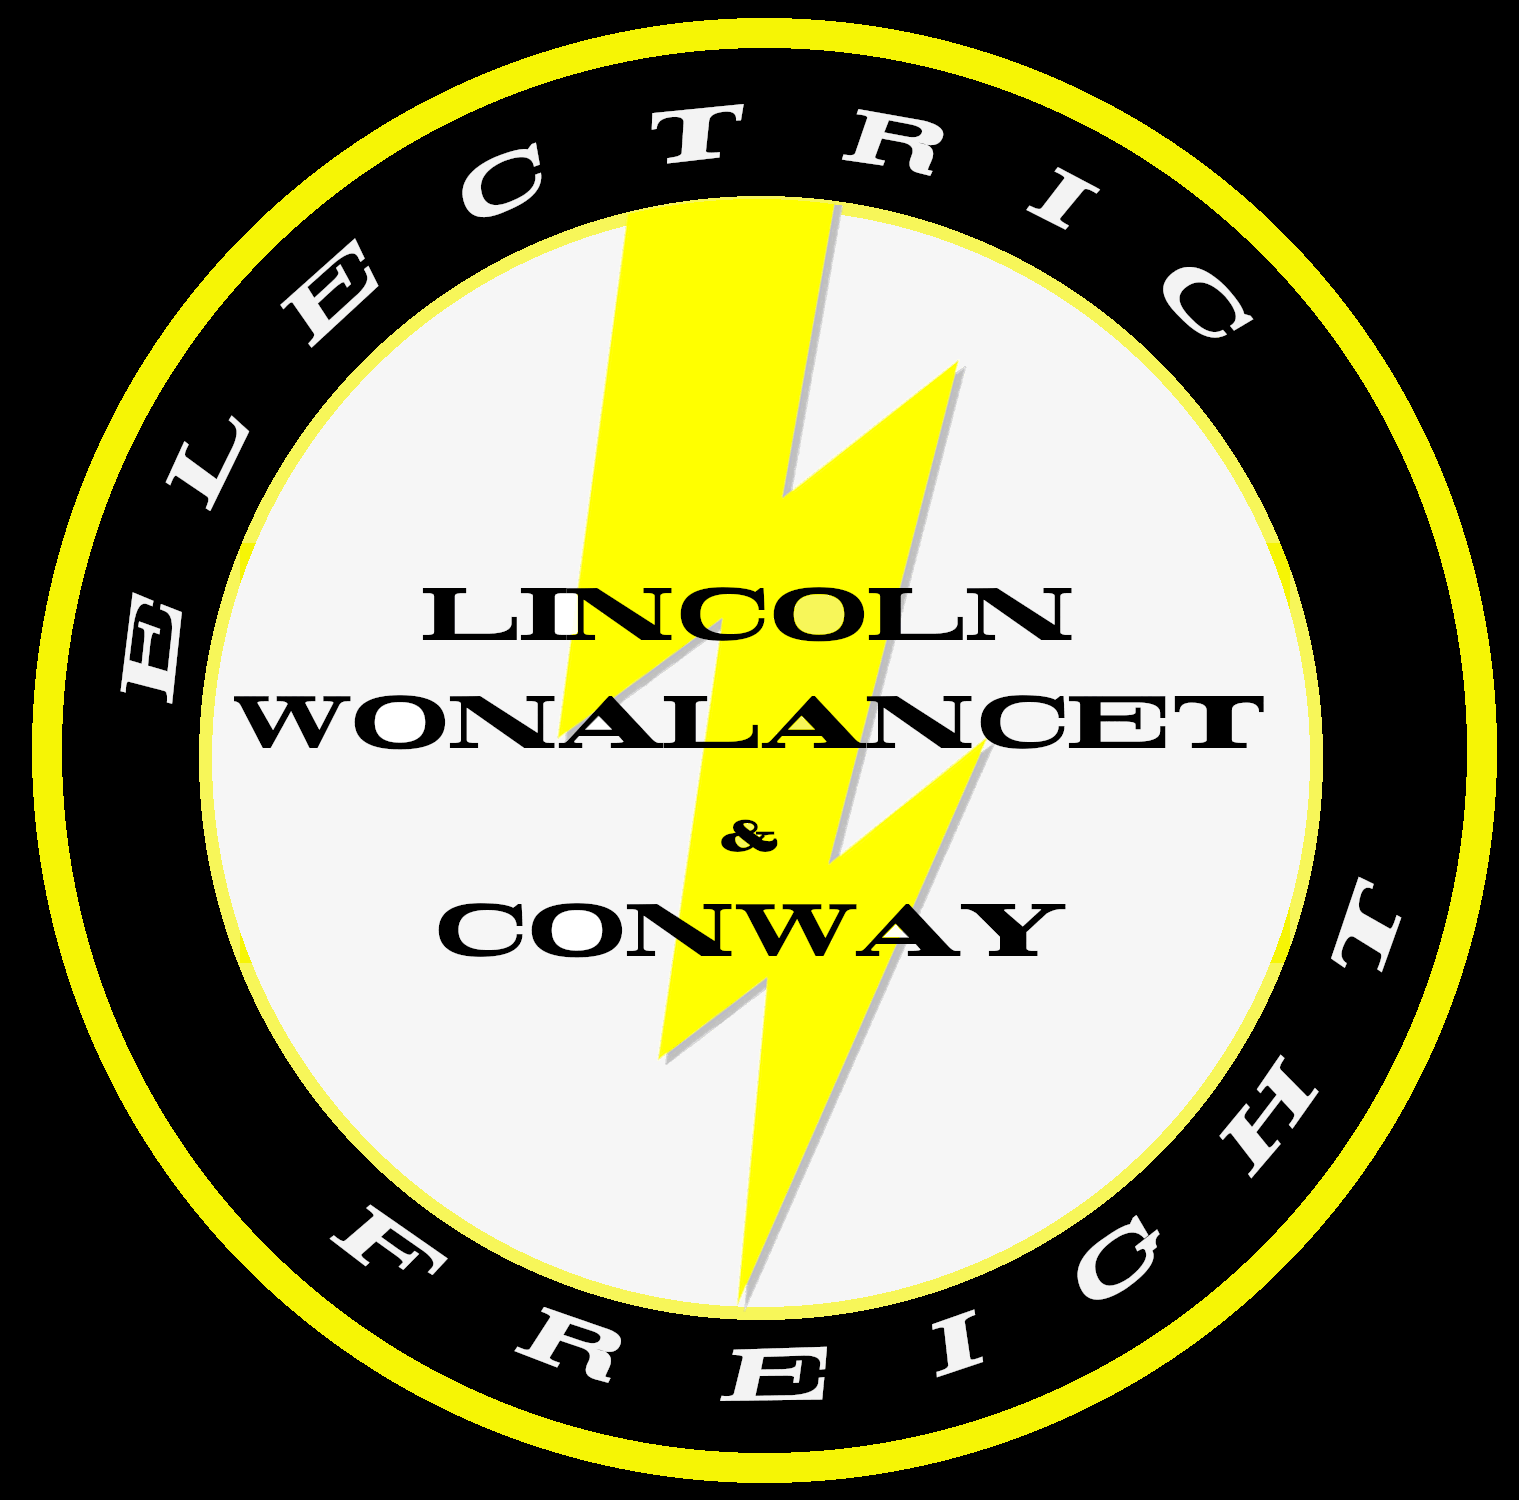 The LW&C's ELECTRIC FREIGHT logo